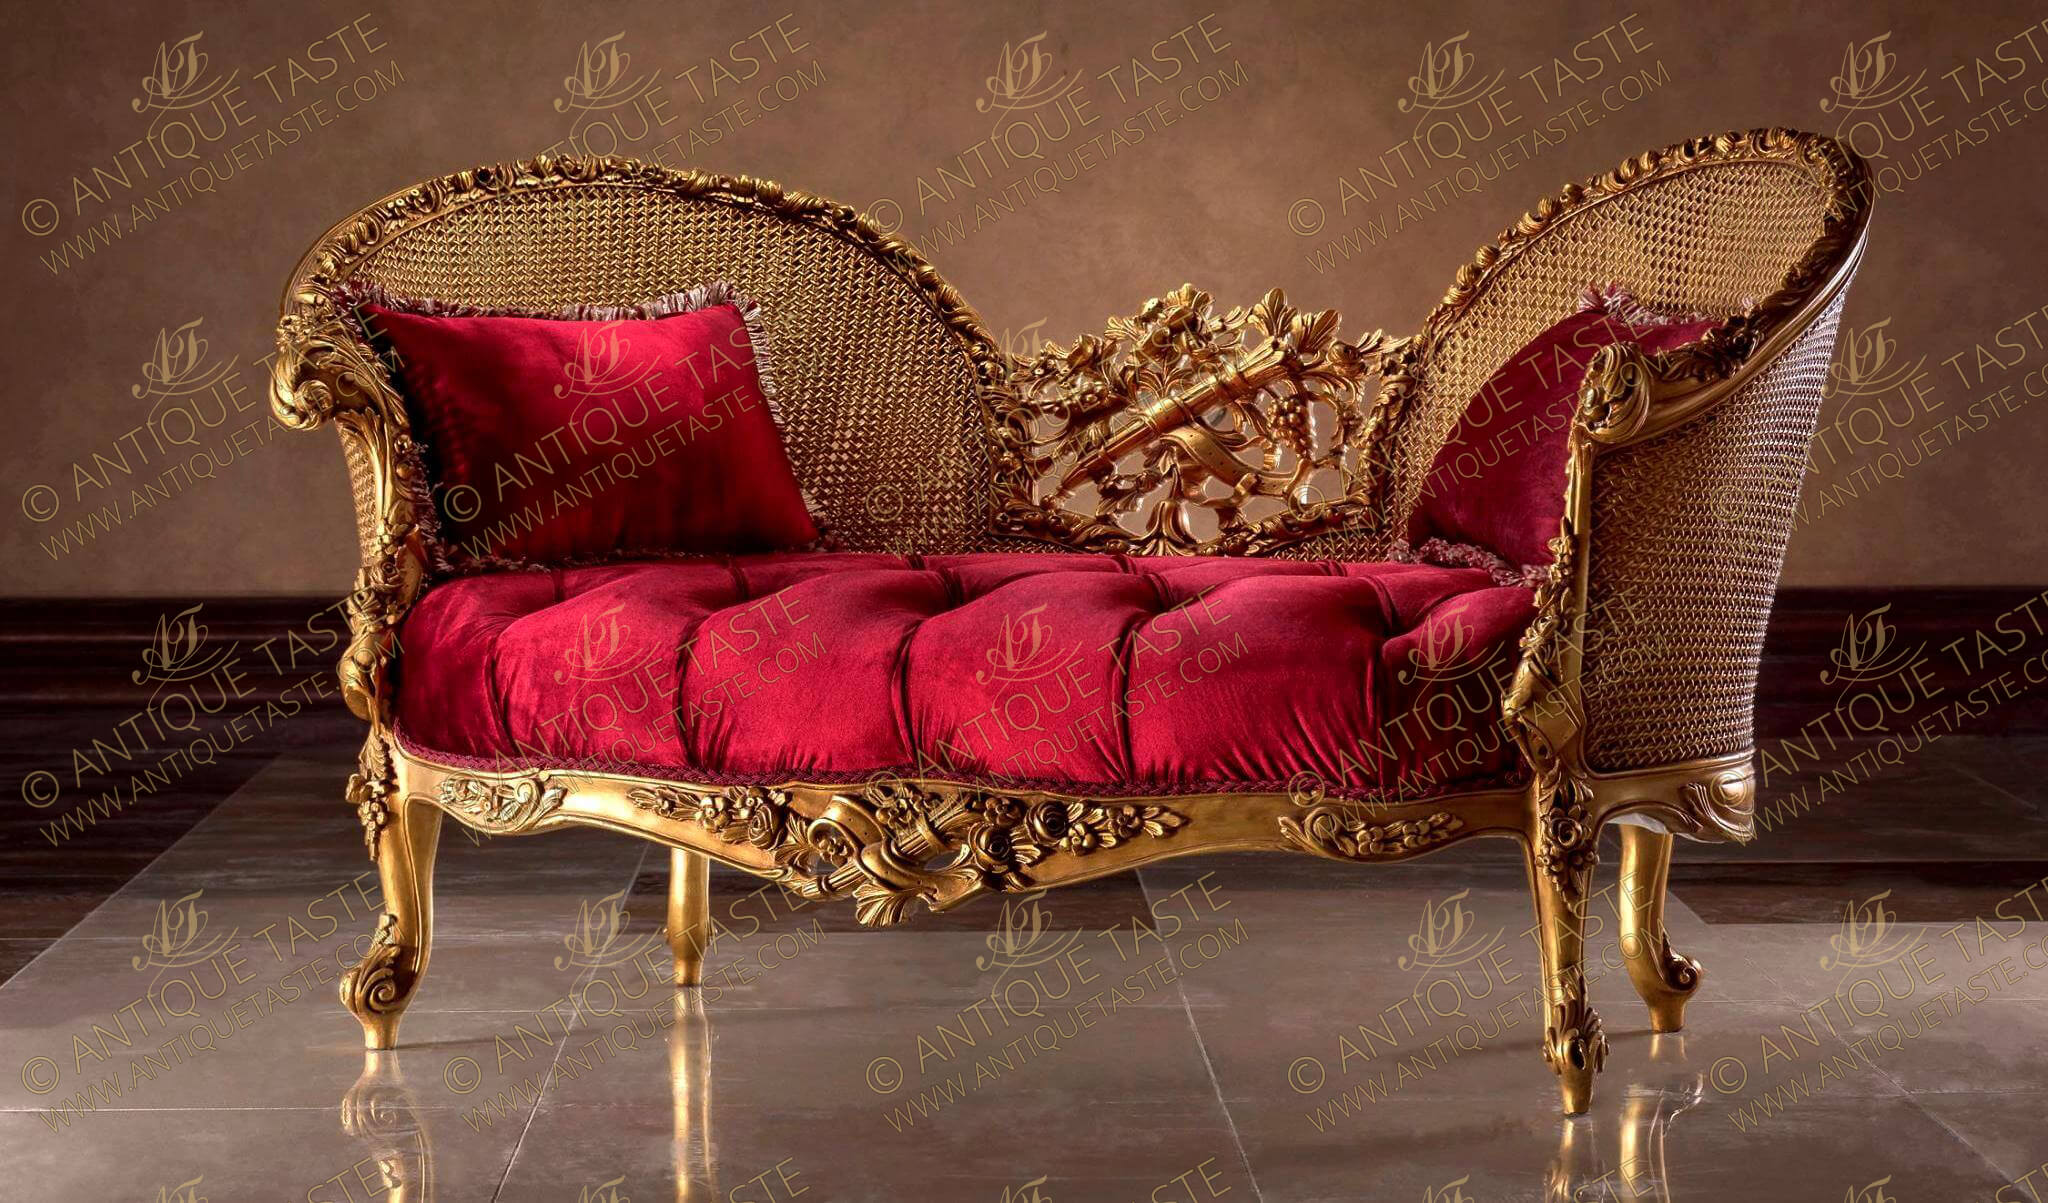 French Transitional Style Canapé en Corbeille; A loveseat sofa Marquise; Hand carved and French foil gilded; Raised by flowering acanthus cabriole turned legs flanking a carved frieze centered by a richly carved floral pierced cabochon centered by a ribbon-tied bow quiver amidst blossoming flowers; Each scrolled arm is richly handcrafted with foliate carvings and acanthus C works leading up to a continuous blossoming frame all around the contour of the wicker cane high wing C shape back which is centered with an exquisite pierced works of grape-vine trellis and blossoming acanthus leaves surrounding a ribbon-tied quiver. The fine piece is a true statement piece mixing the Rococo and Baroque carving elements in a harmonious result. One of our large volume demanded pieces.